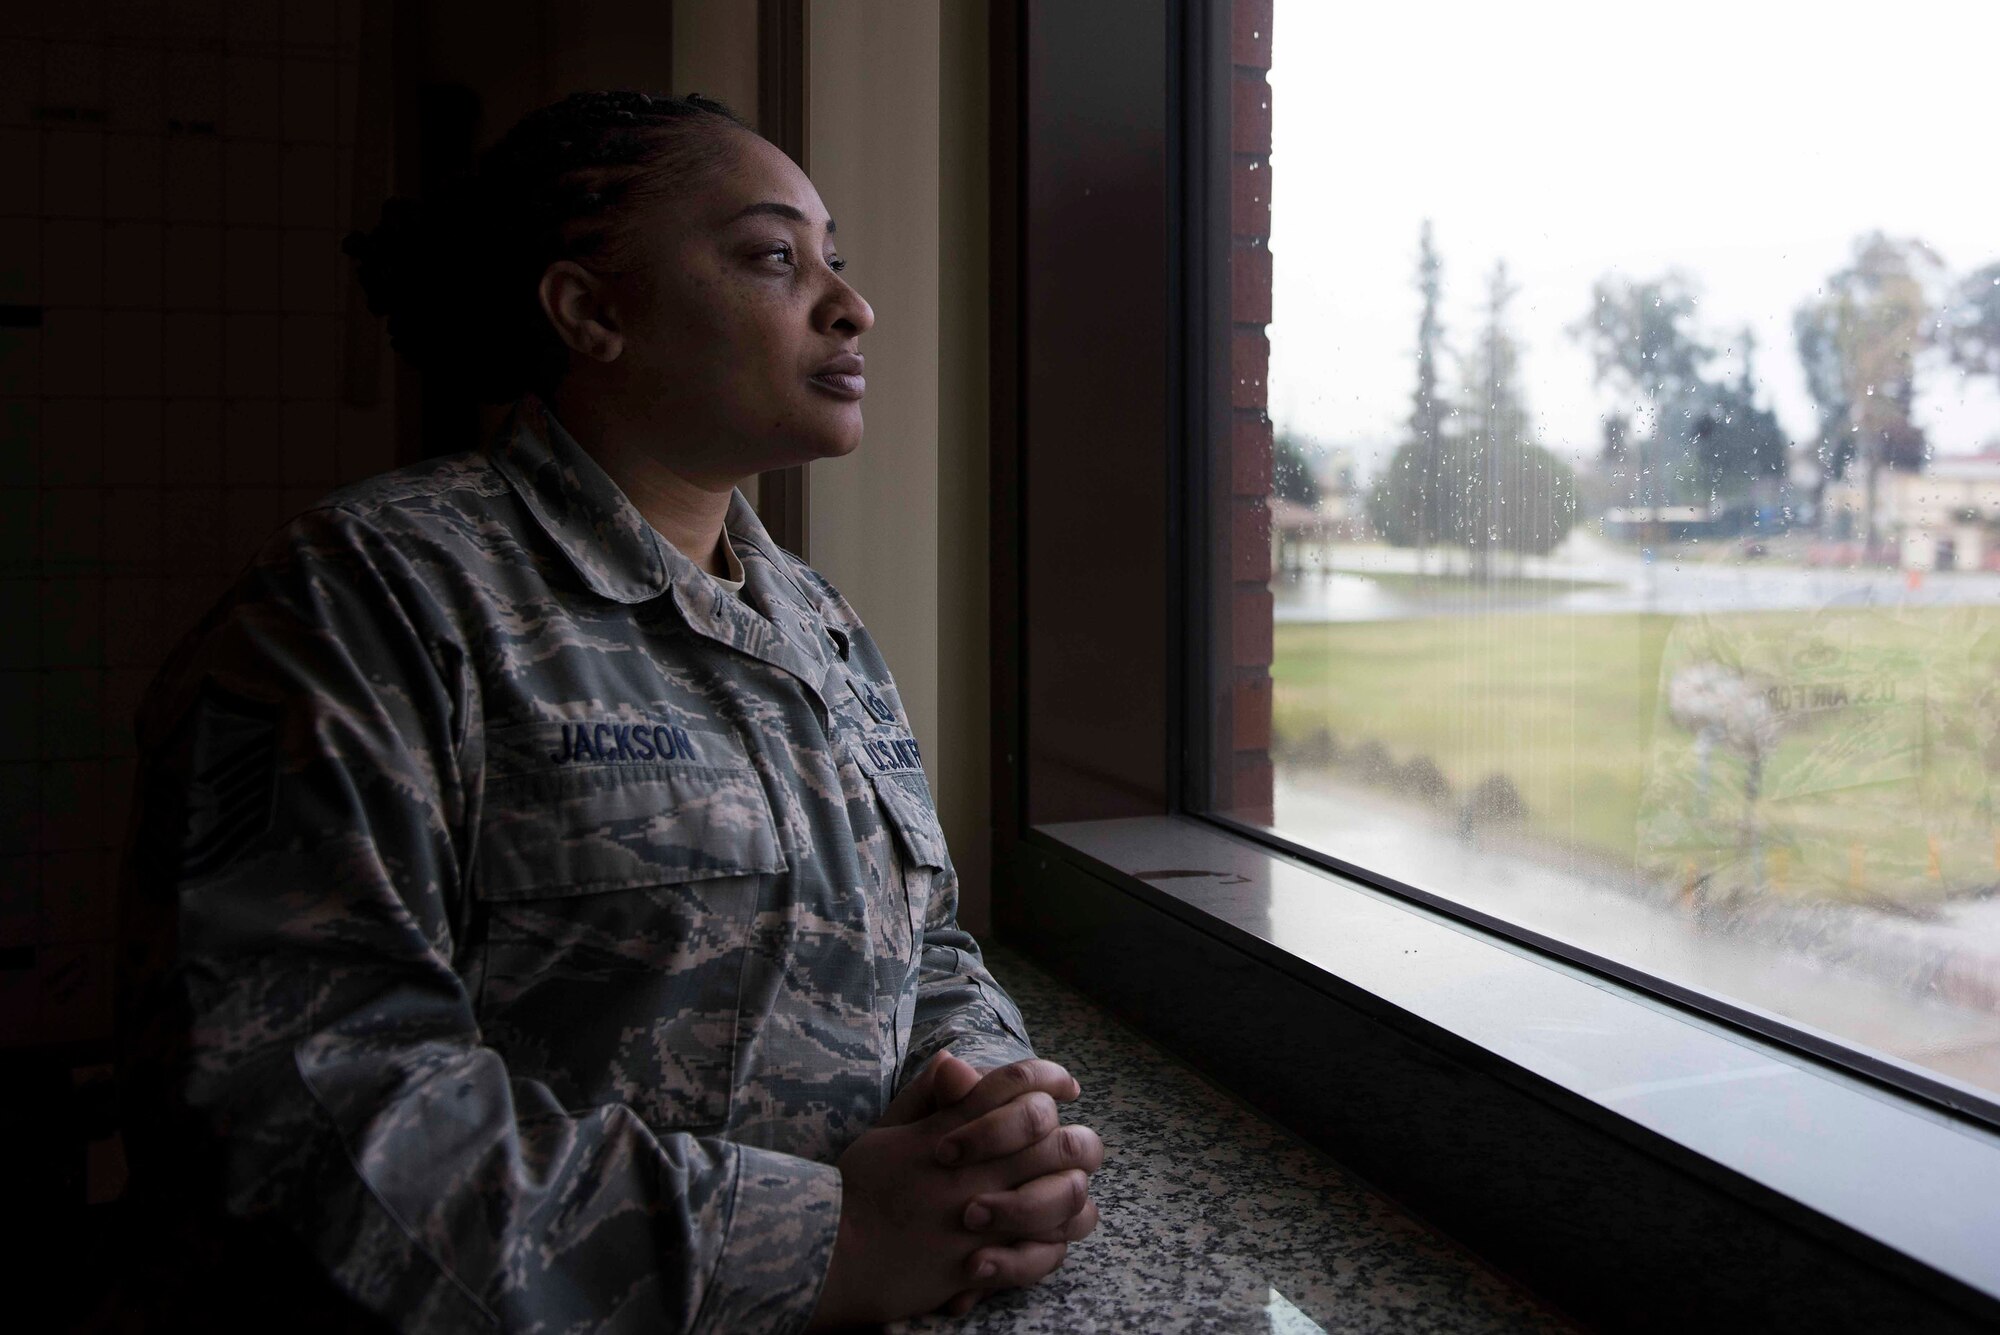 U.S. Air Force Master Sgt. Debbie Jackson, 39th Air Base Wing career assistance advisor, stares out the window of her office Feb. 21, 2020, at Incirlik Air Base, Turkey. Jackson is tasked with mentoring Airmen about their choices in regards to career advancement, professional development and retraining. (U.S. Air Force photo by Staff Sgt. Joshua Magbanua)